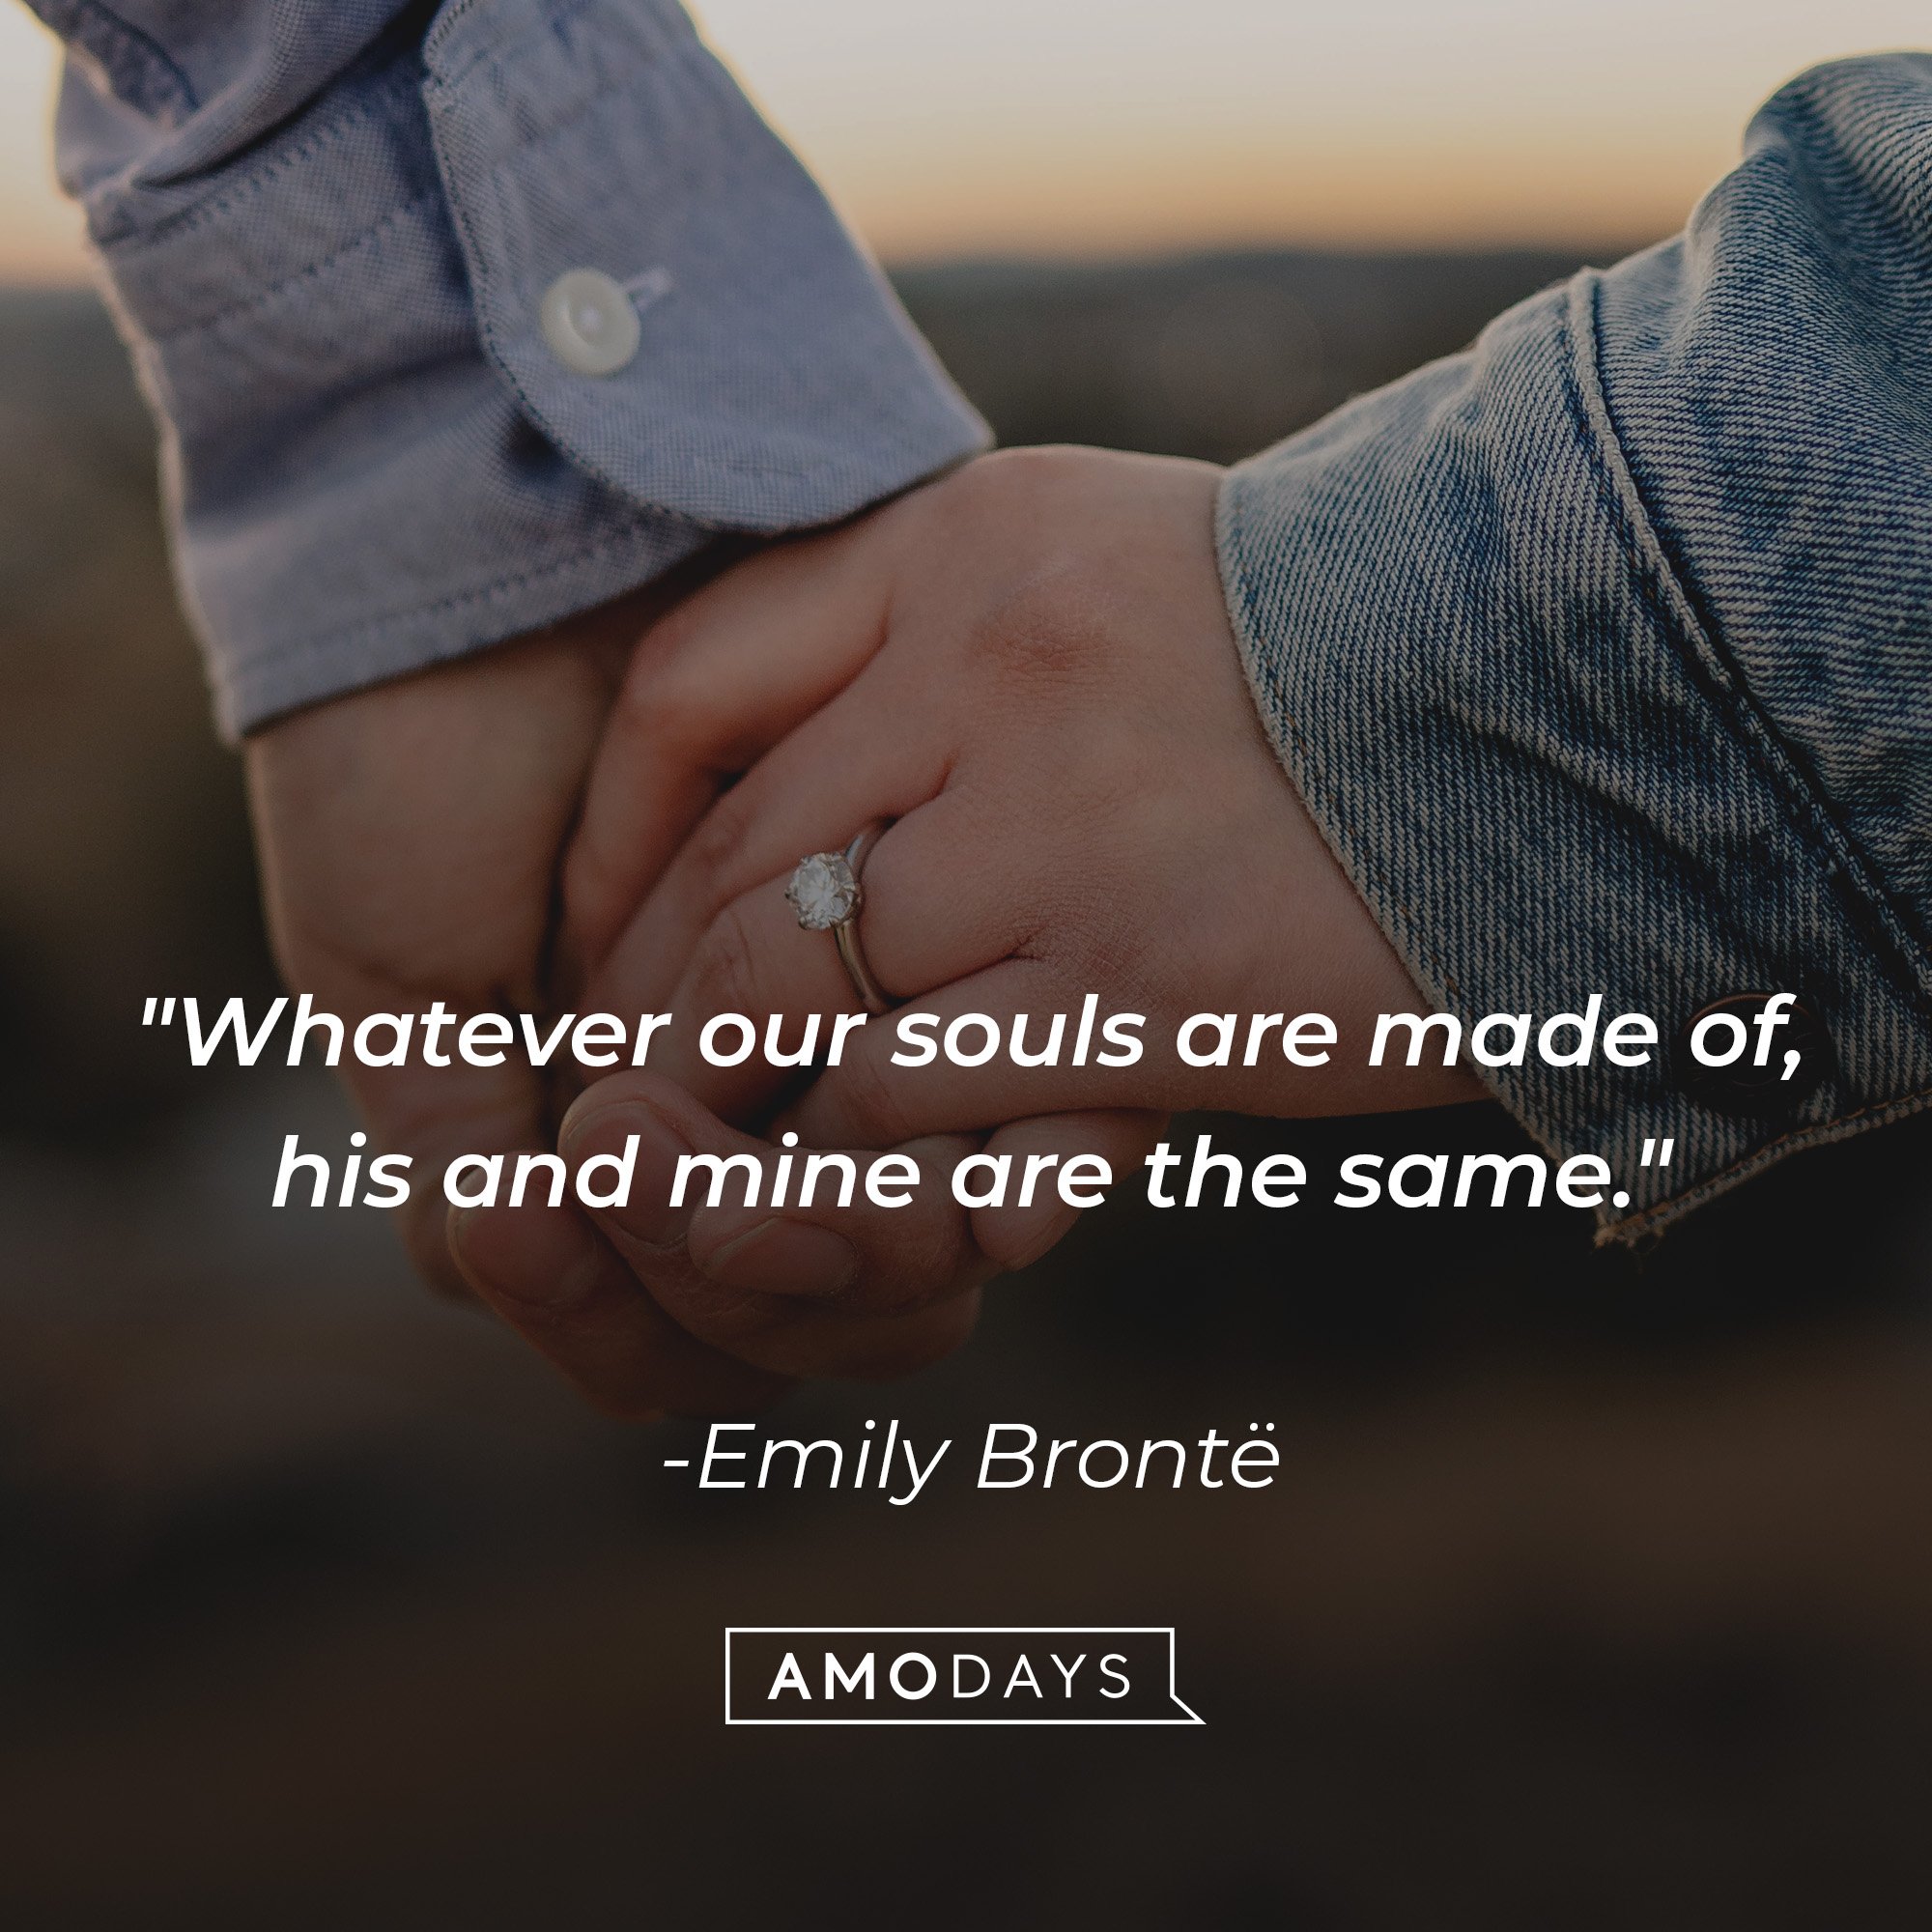 Emily Brontë's quote: "Whatever our souls are made of, his and mine are the same." | Image: AmoDays